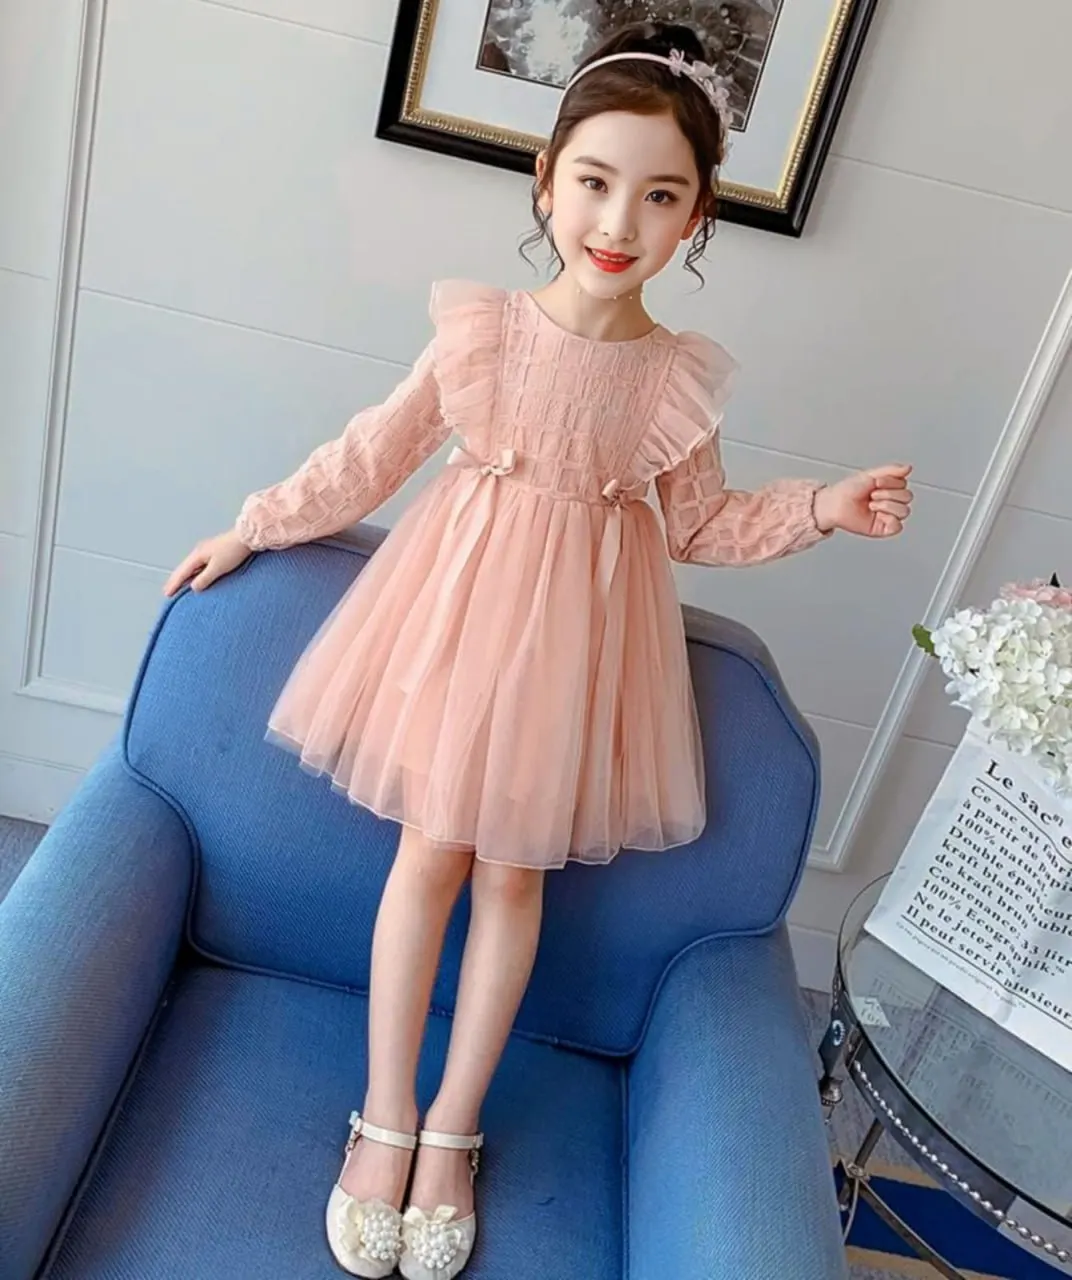 Elegant Furing Beautiful Princess Dress Spring Autumn Girls 5-9 years old dress with Cotton material combination Furing